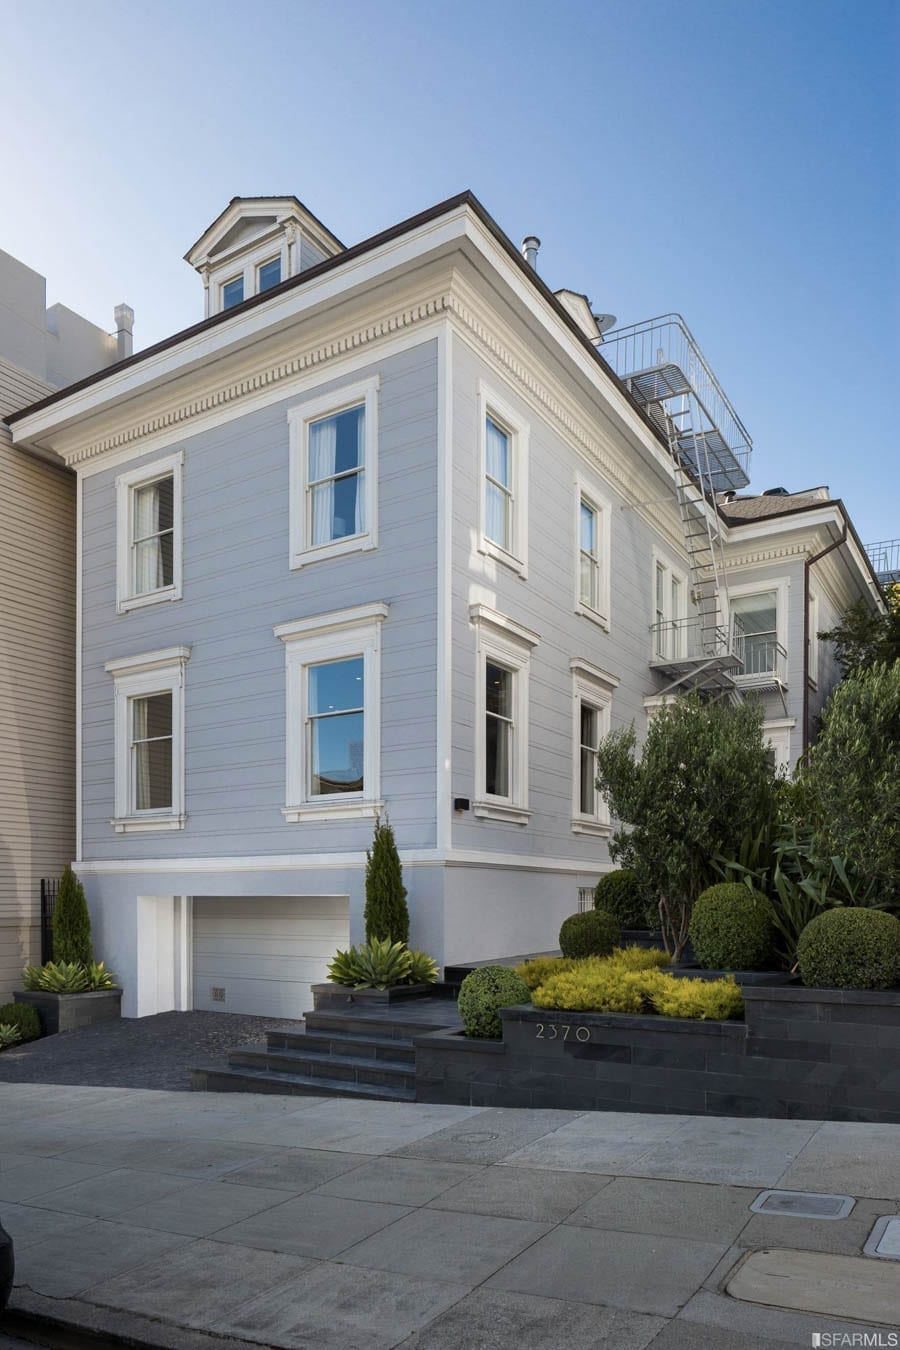 Peaking in Pacific Heights – 2370 Washington Street, Pacific Heights, San Francisco, California, CA 94115, United States of America – For sale for $10.5 million today (£8.2 million, €9.3 million or درهم38.6 million) through Neal Ward Properties